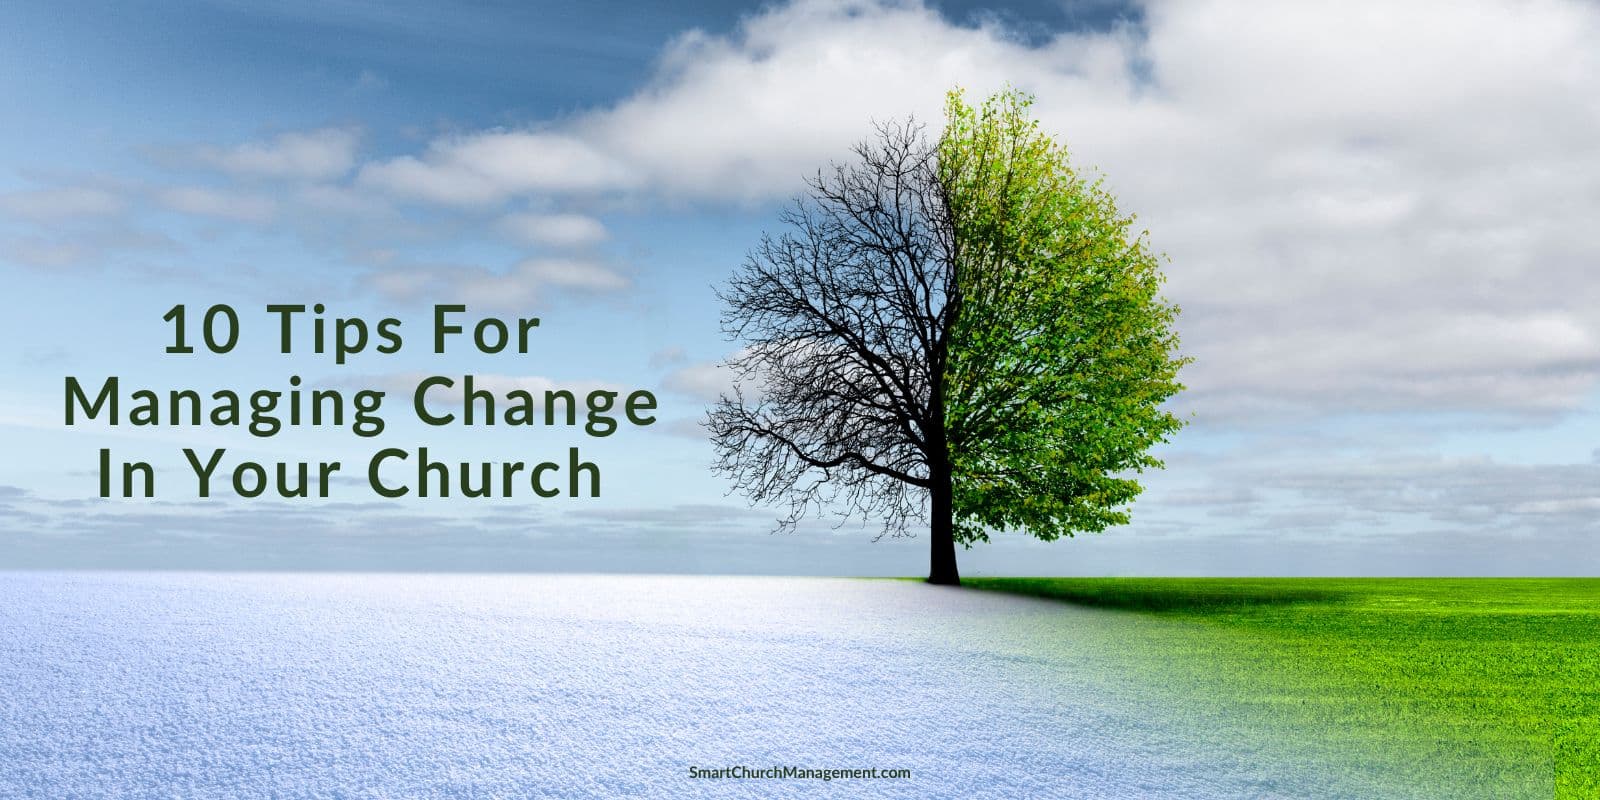 How to manage change in your church